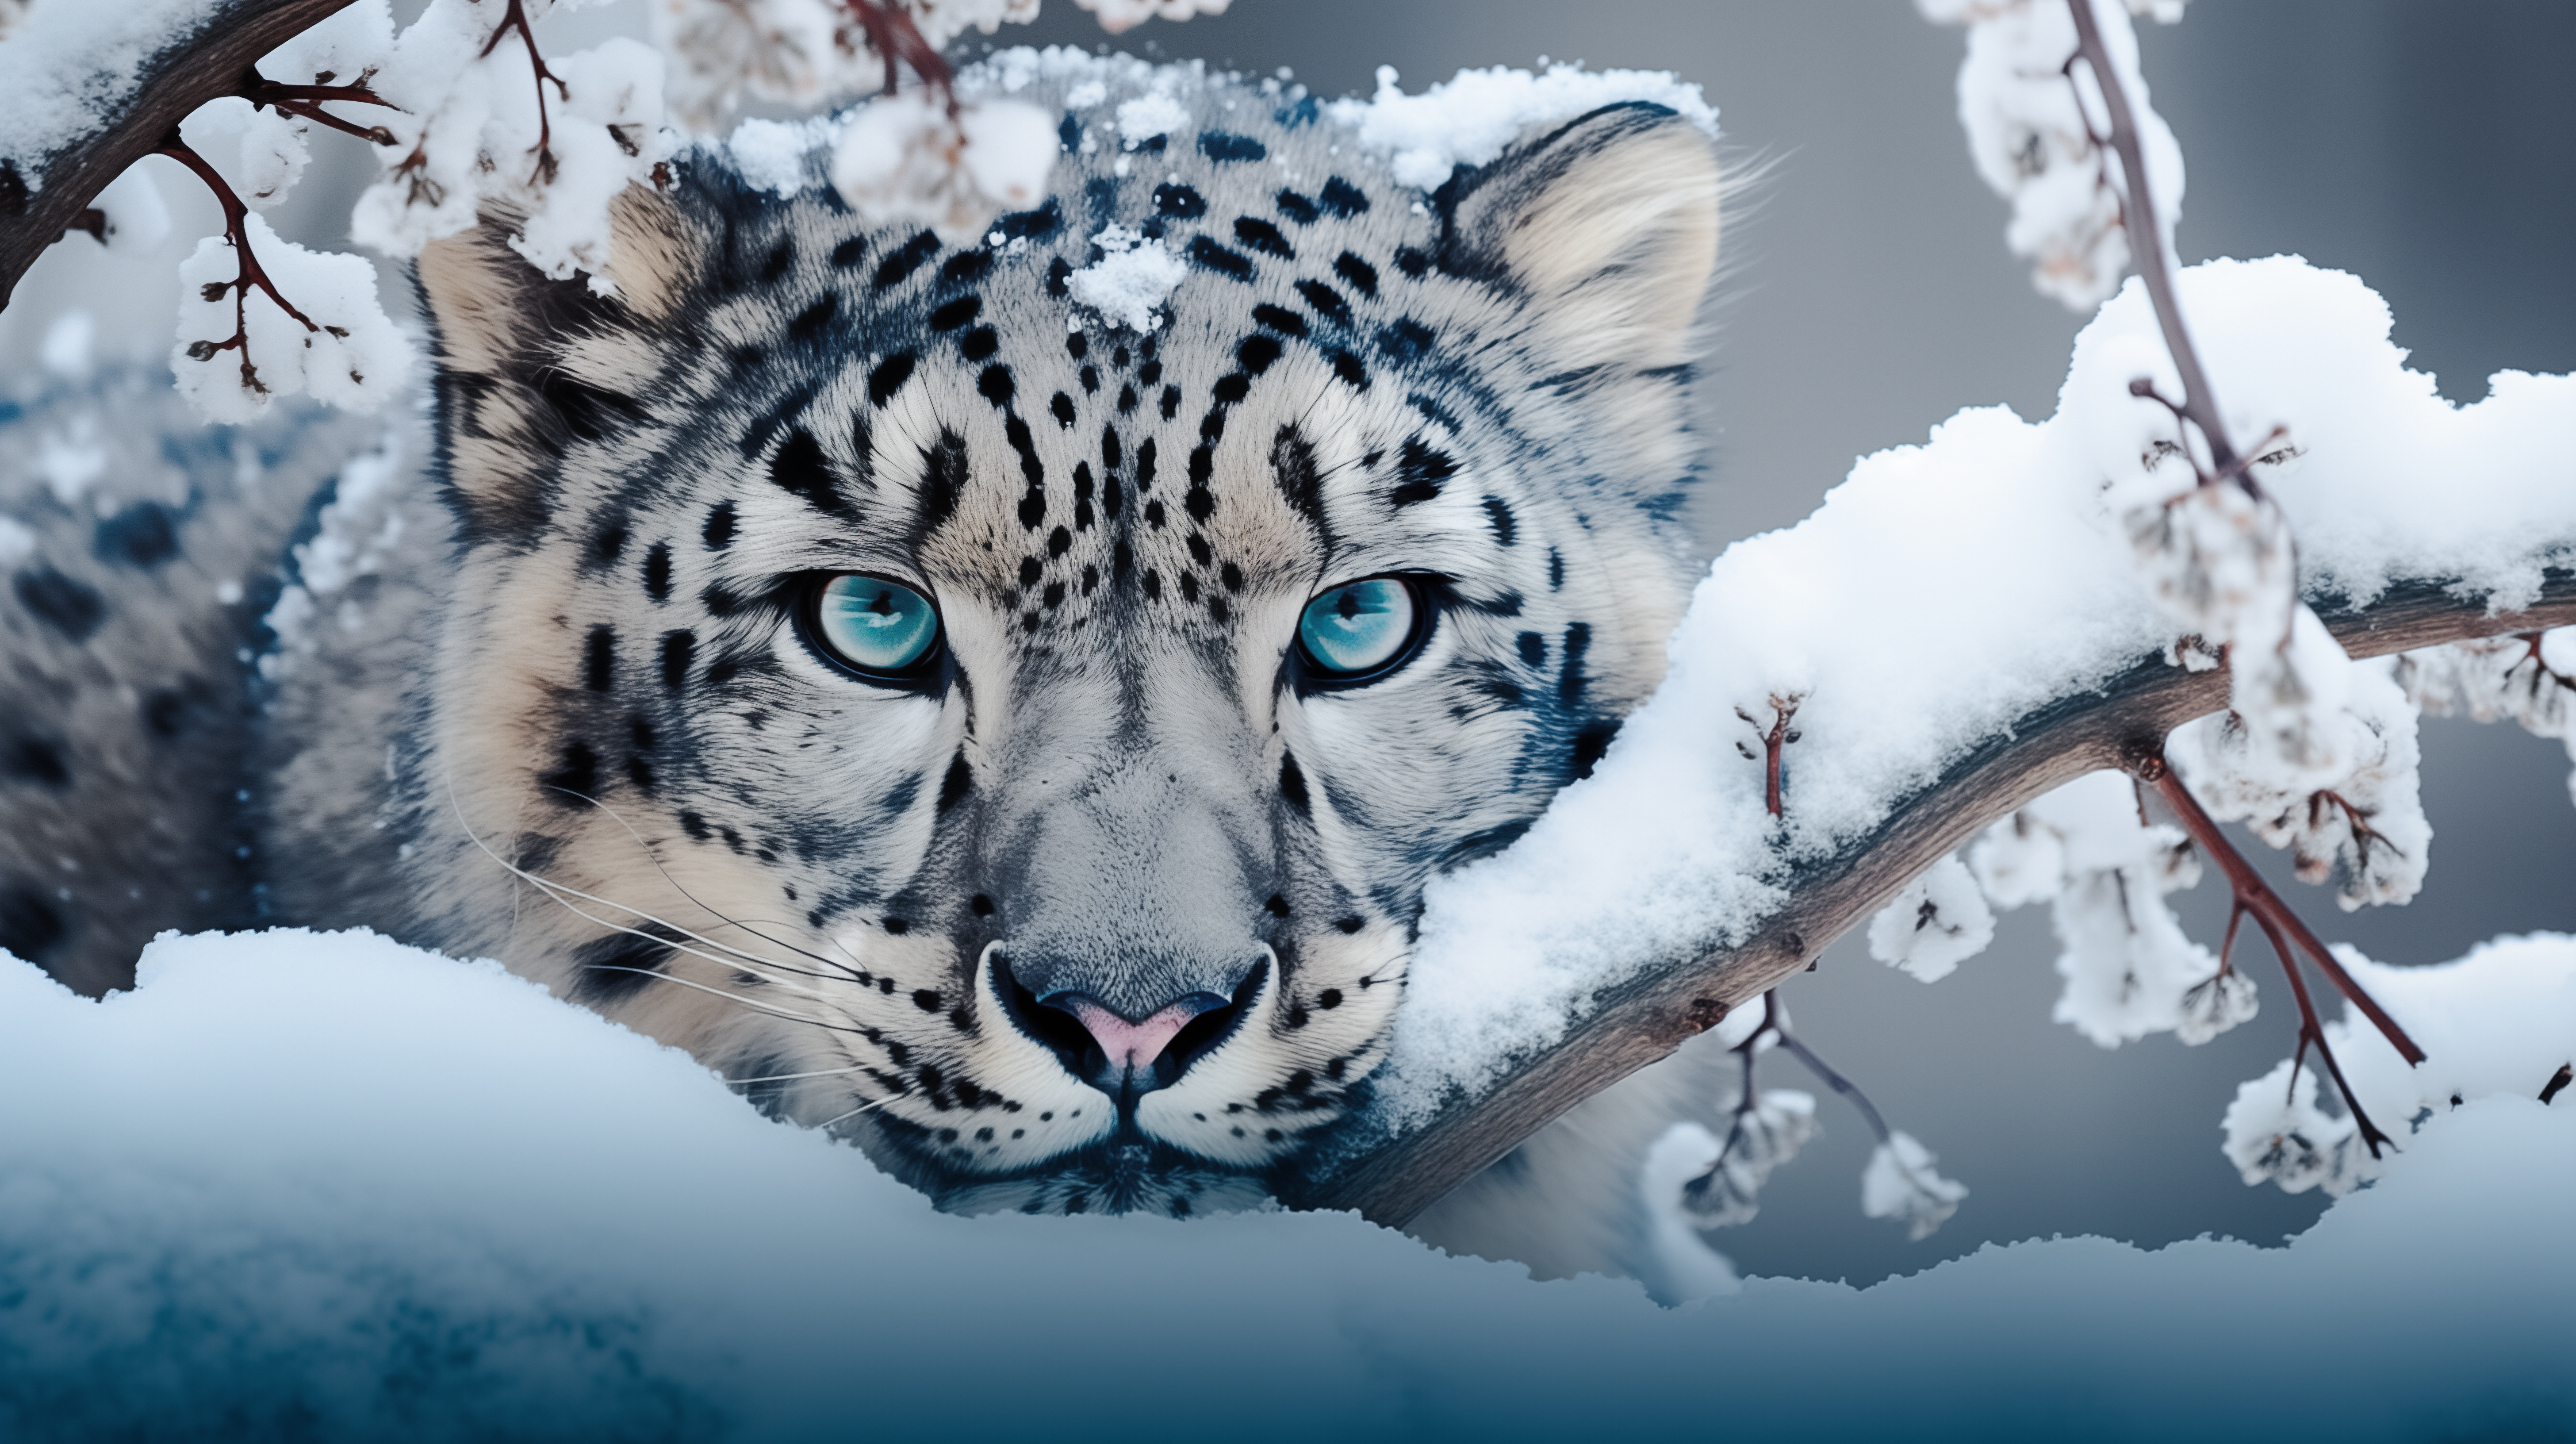 HD wallpaper of an intense snow leopard face peering through snowy branches, perfect for a desktop background.